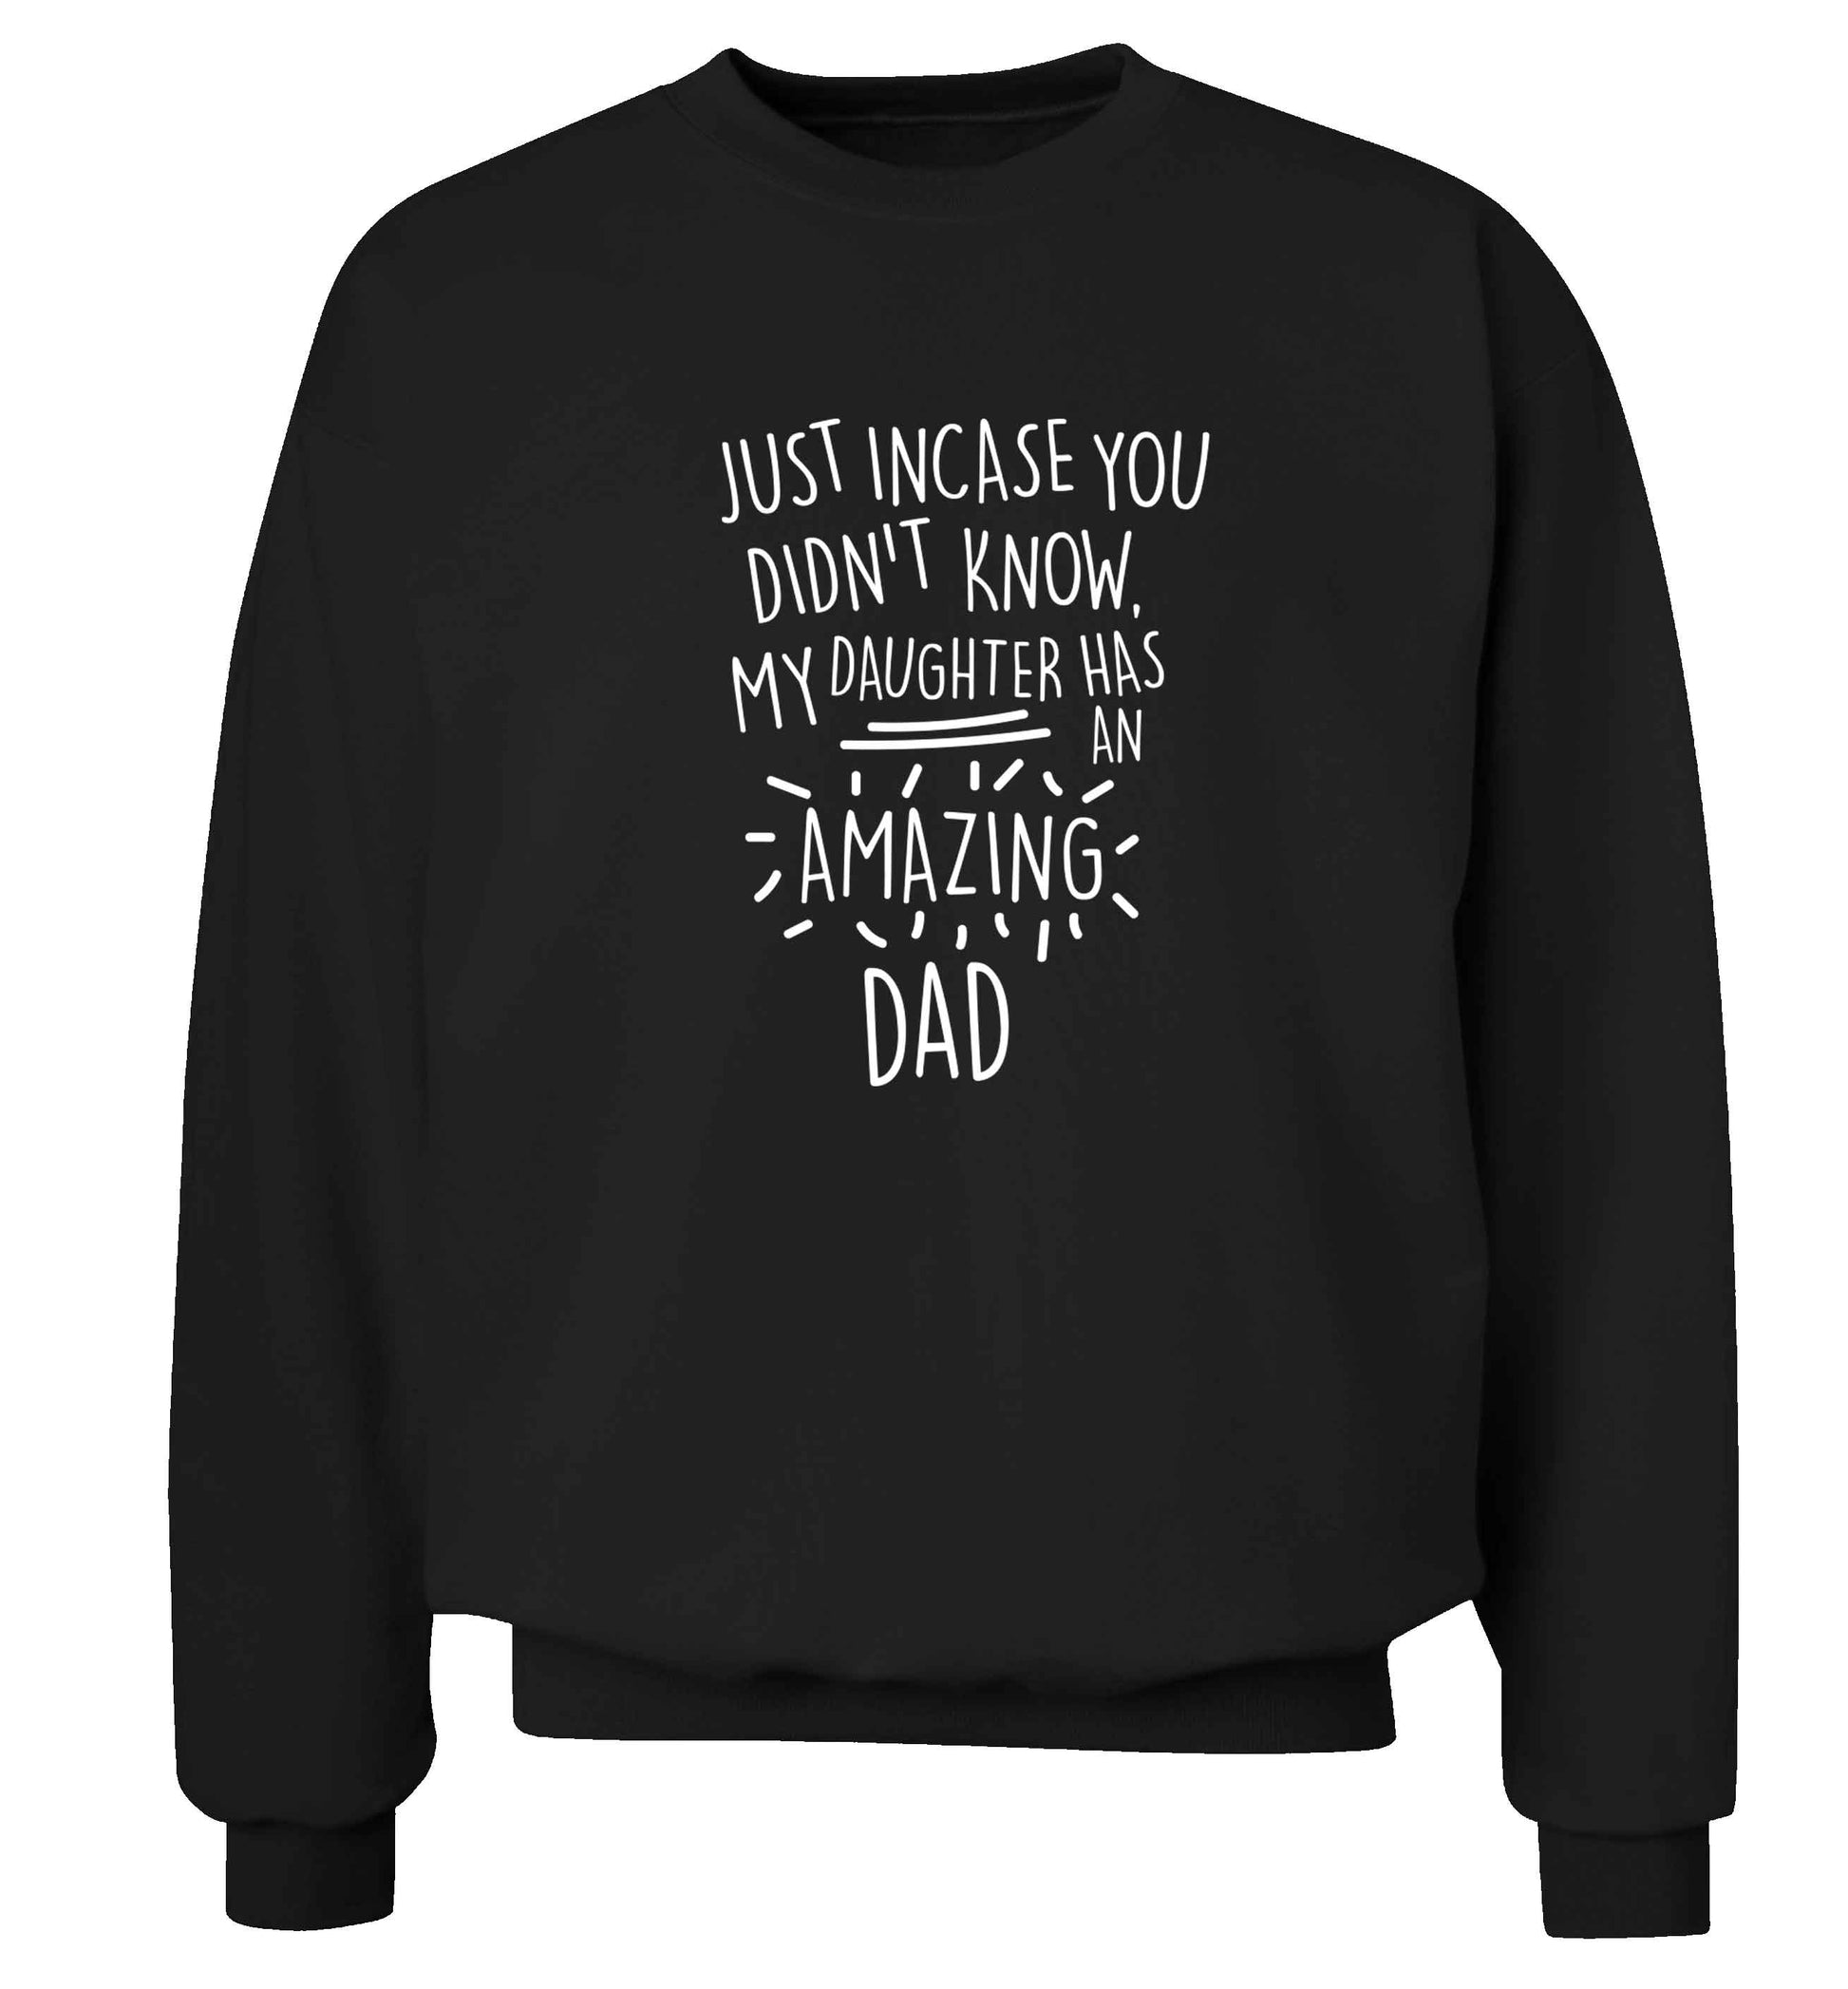 Just incase you didn't know my daughter has an amazing dad adult's unisex black sweater 2XL